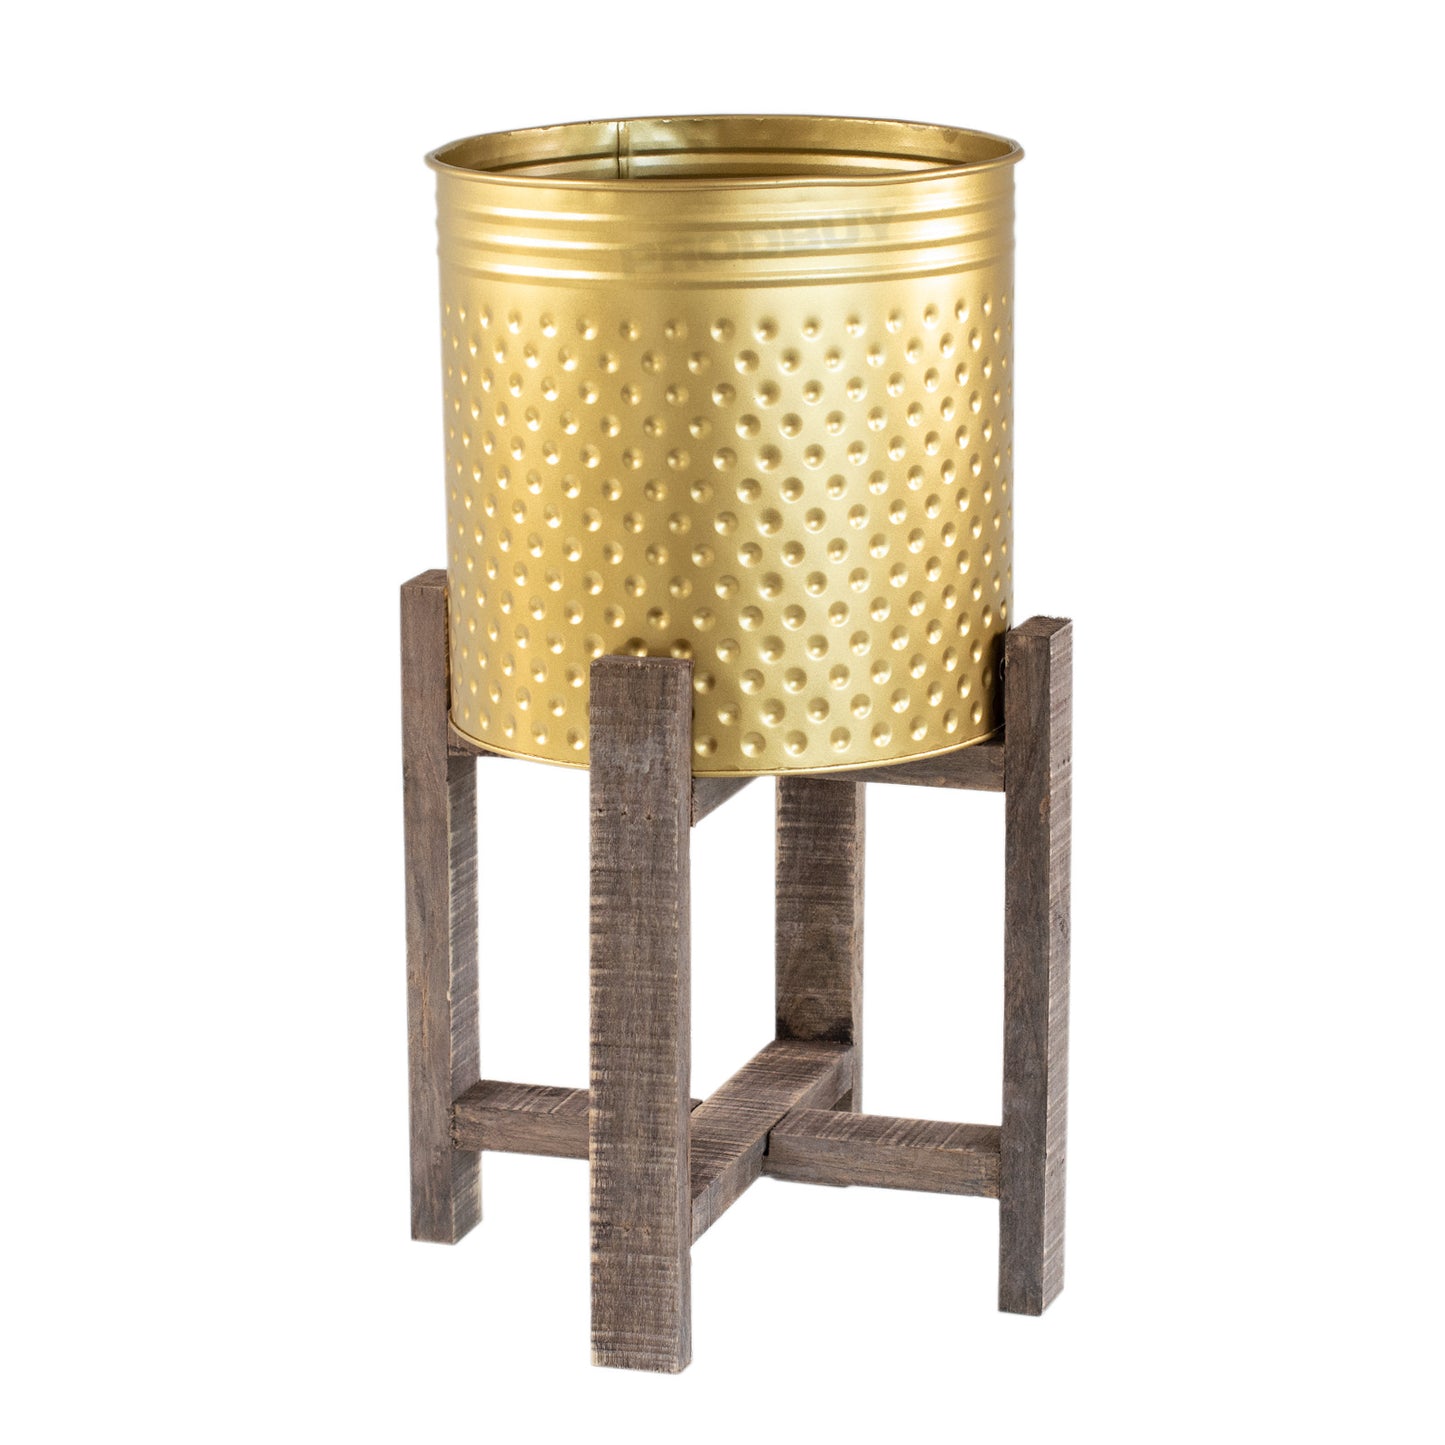 Floor Standing Metal Plant Pot Cover with Wooden Stand